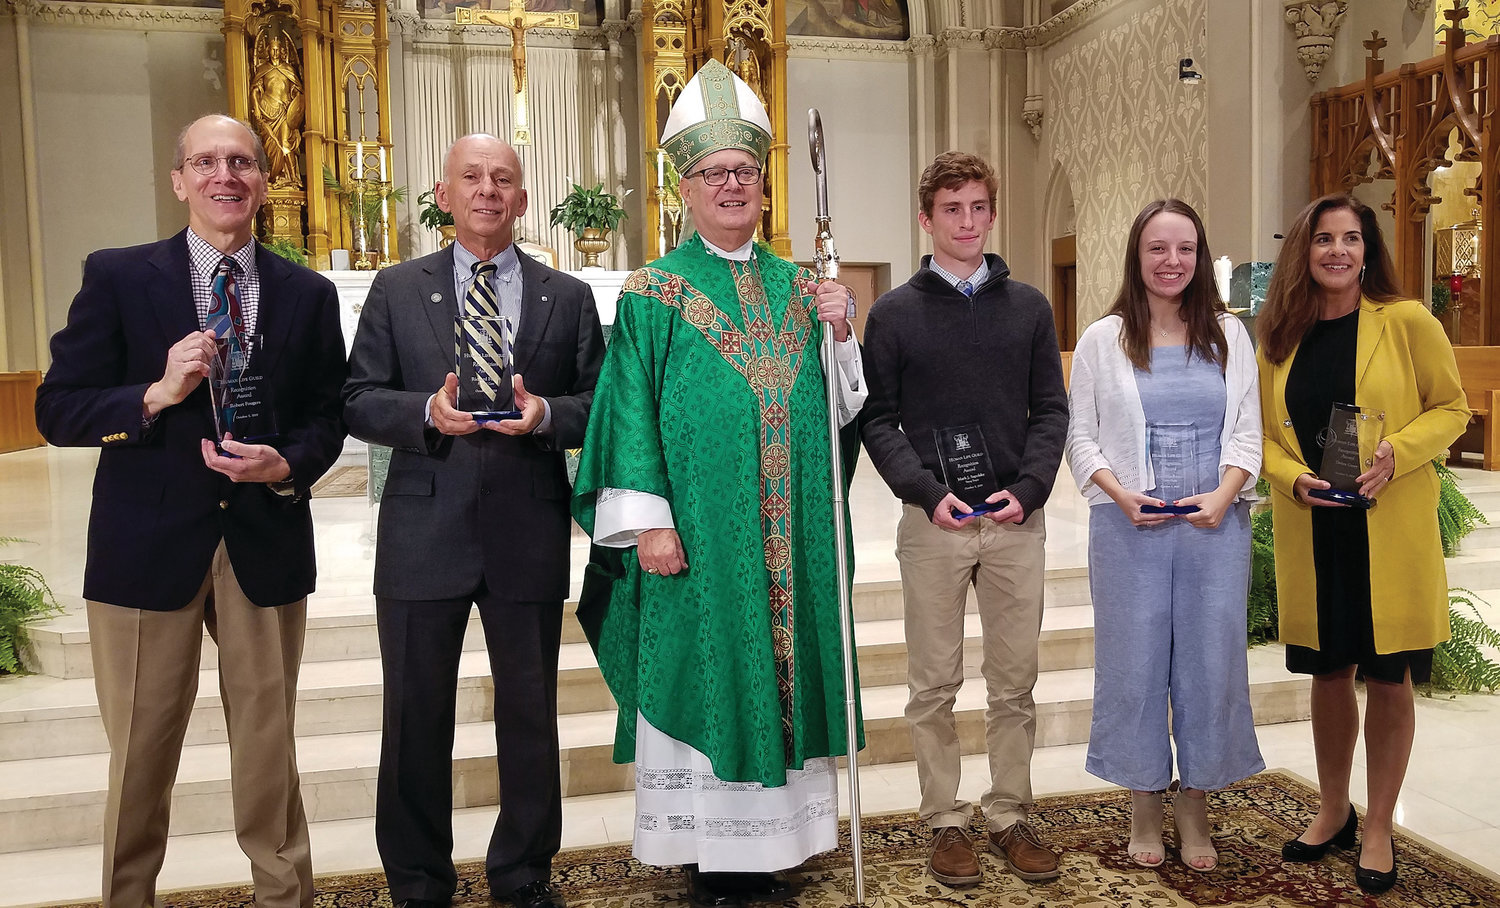 Bishop Thomas J. Tobin with award recipients after Mass. From left,  Robert Fougere, Richard Forest, Bishop, Mark Sapolsky, Cordelia Ruzzo and Debra Carey.